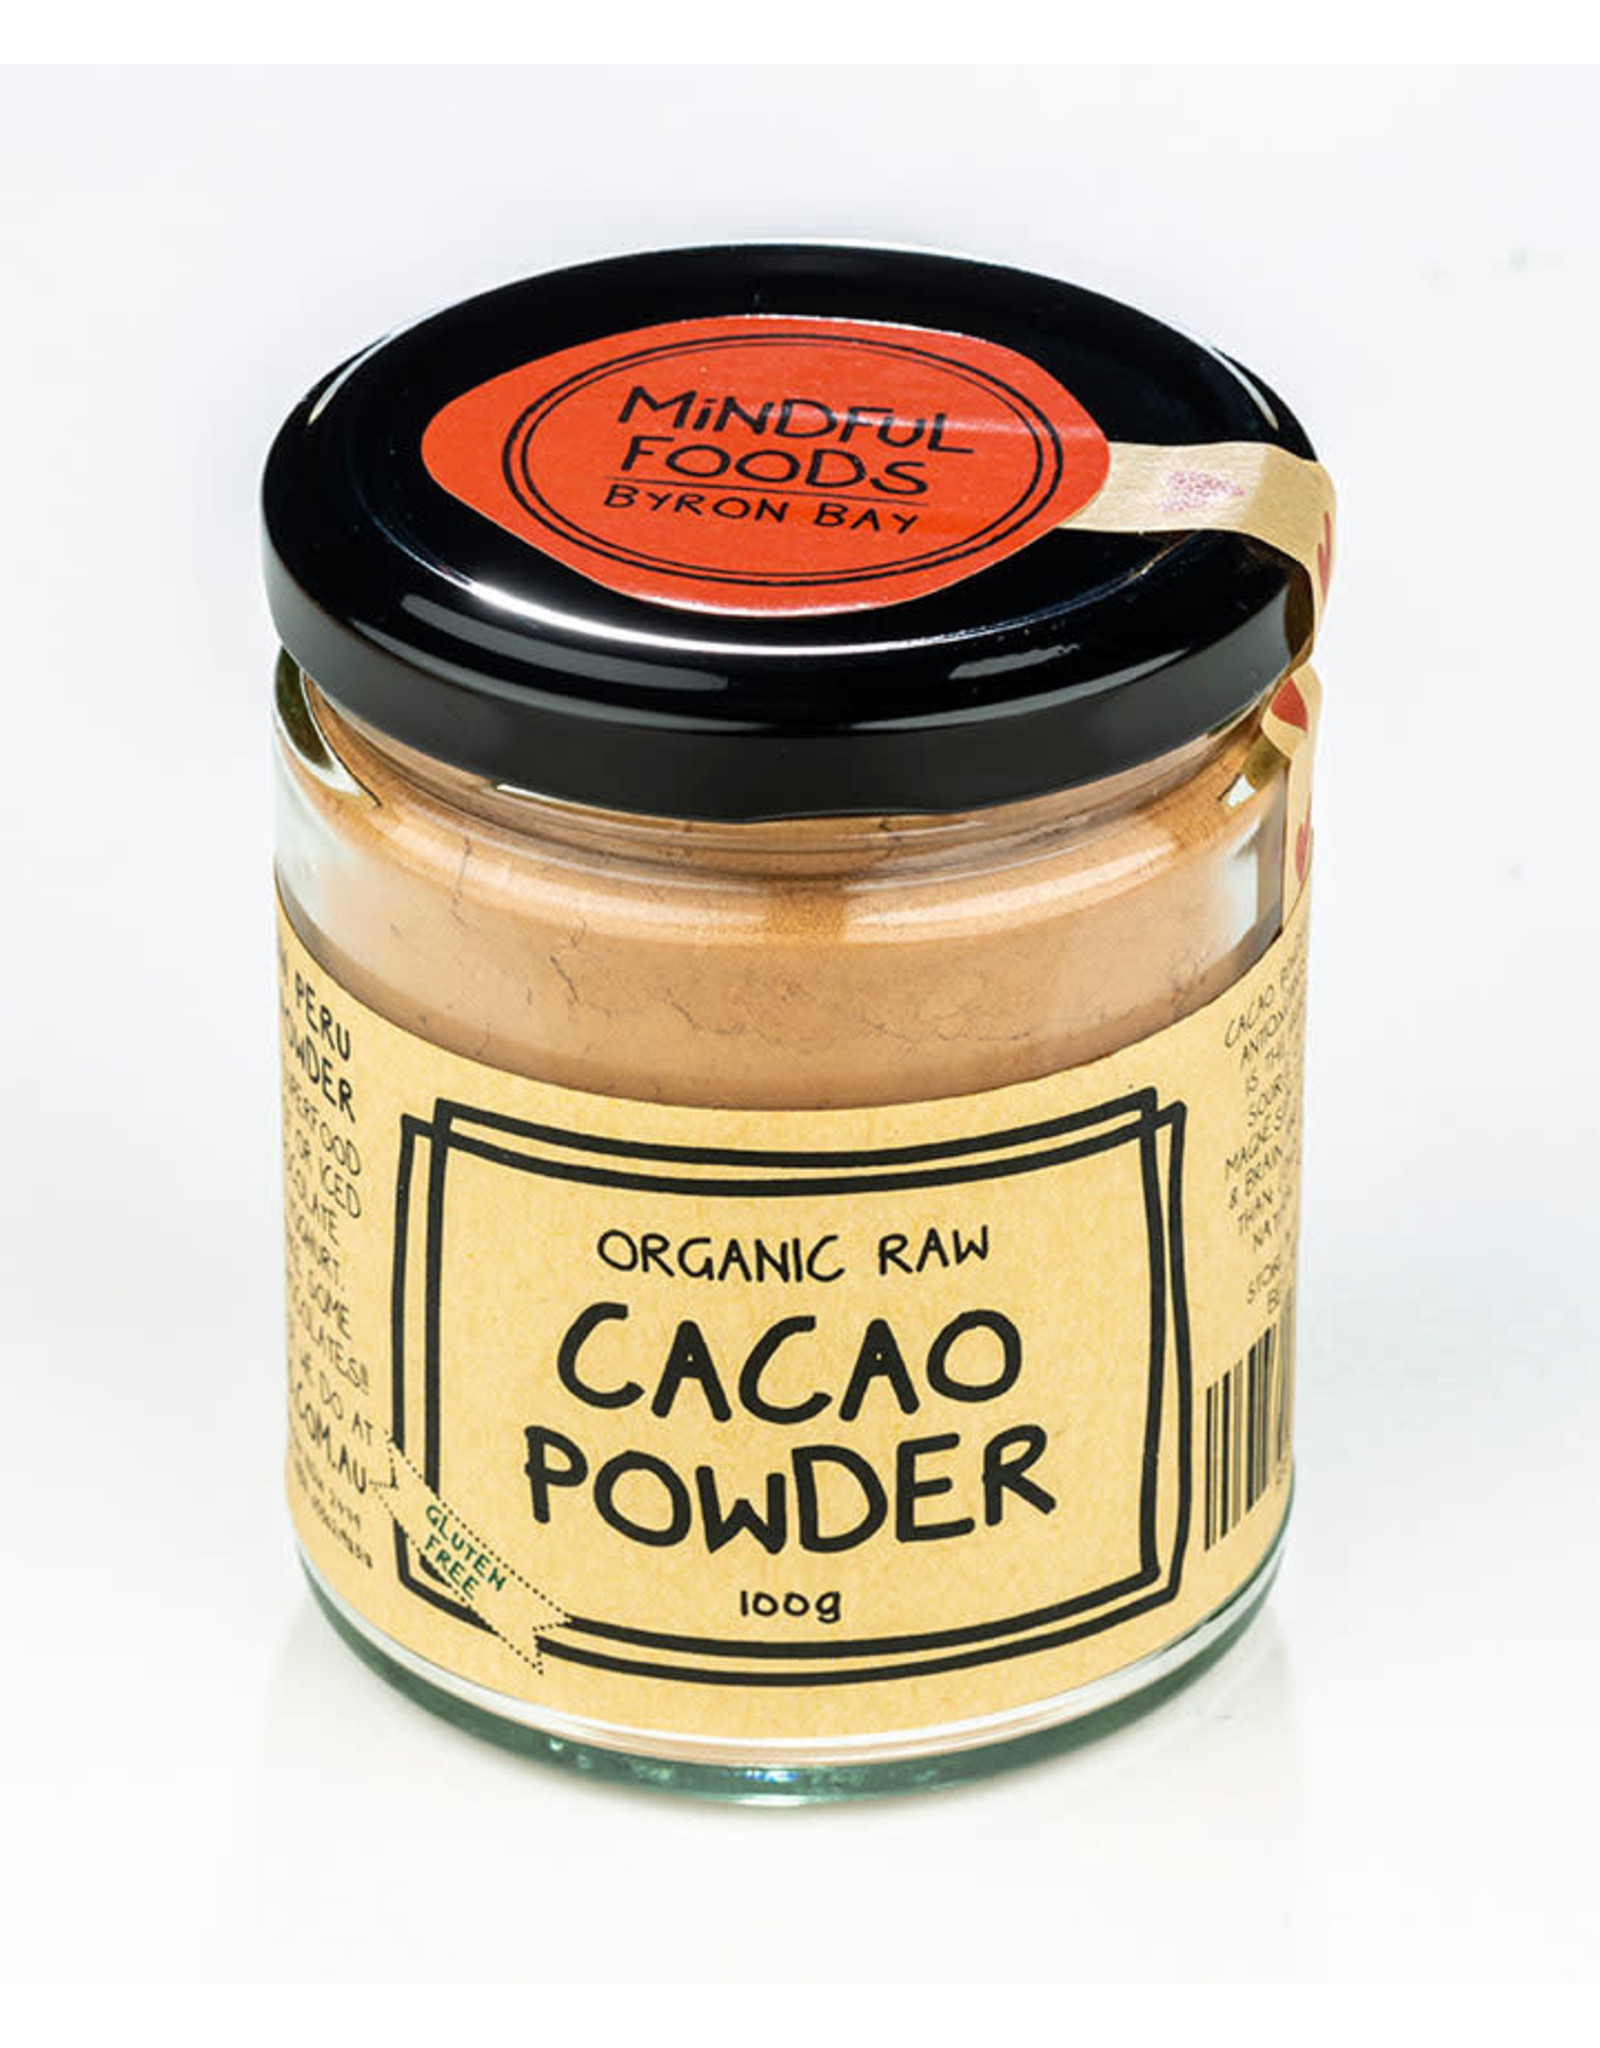 Mindful Foods Cacao Powder - Organic